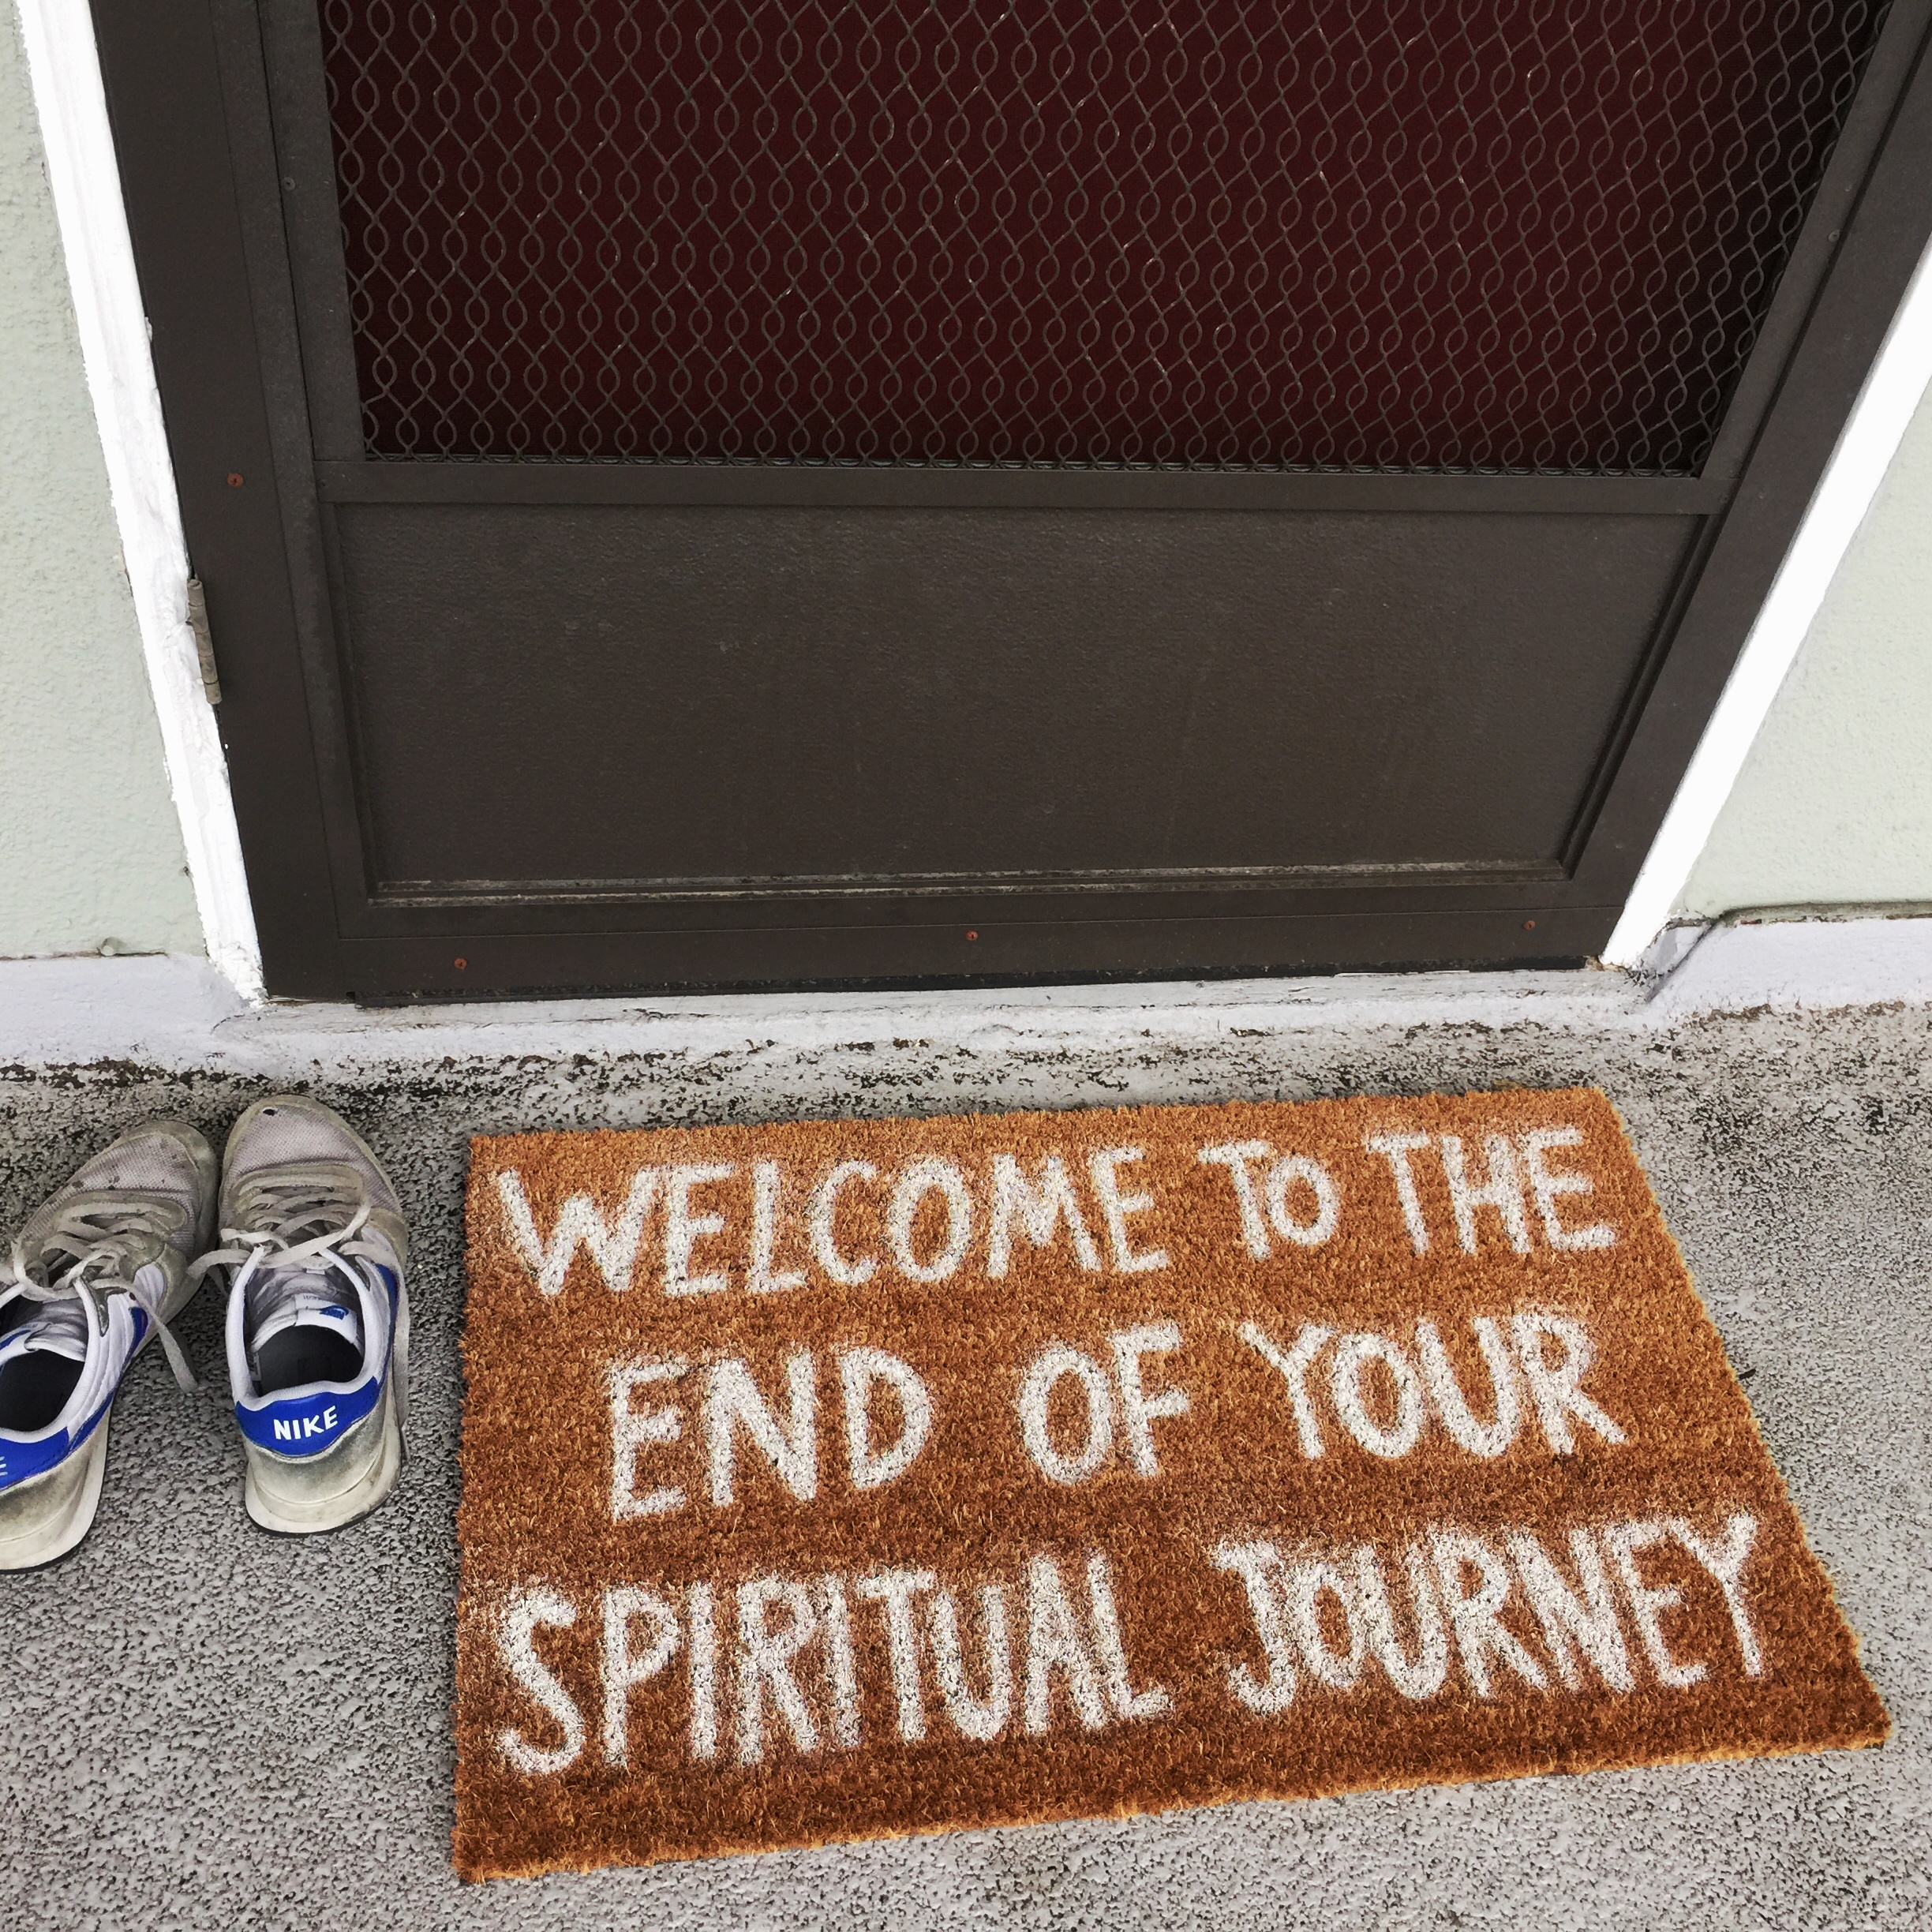 WELCOME TO THE END OF YOUR SPIRITUAL JOURNEY